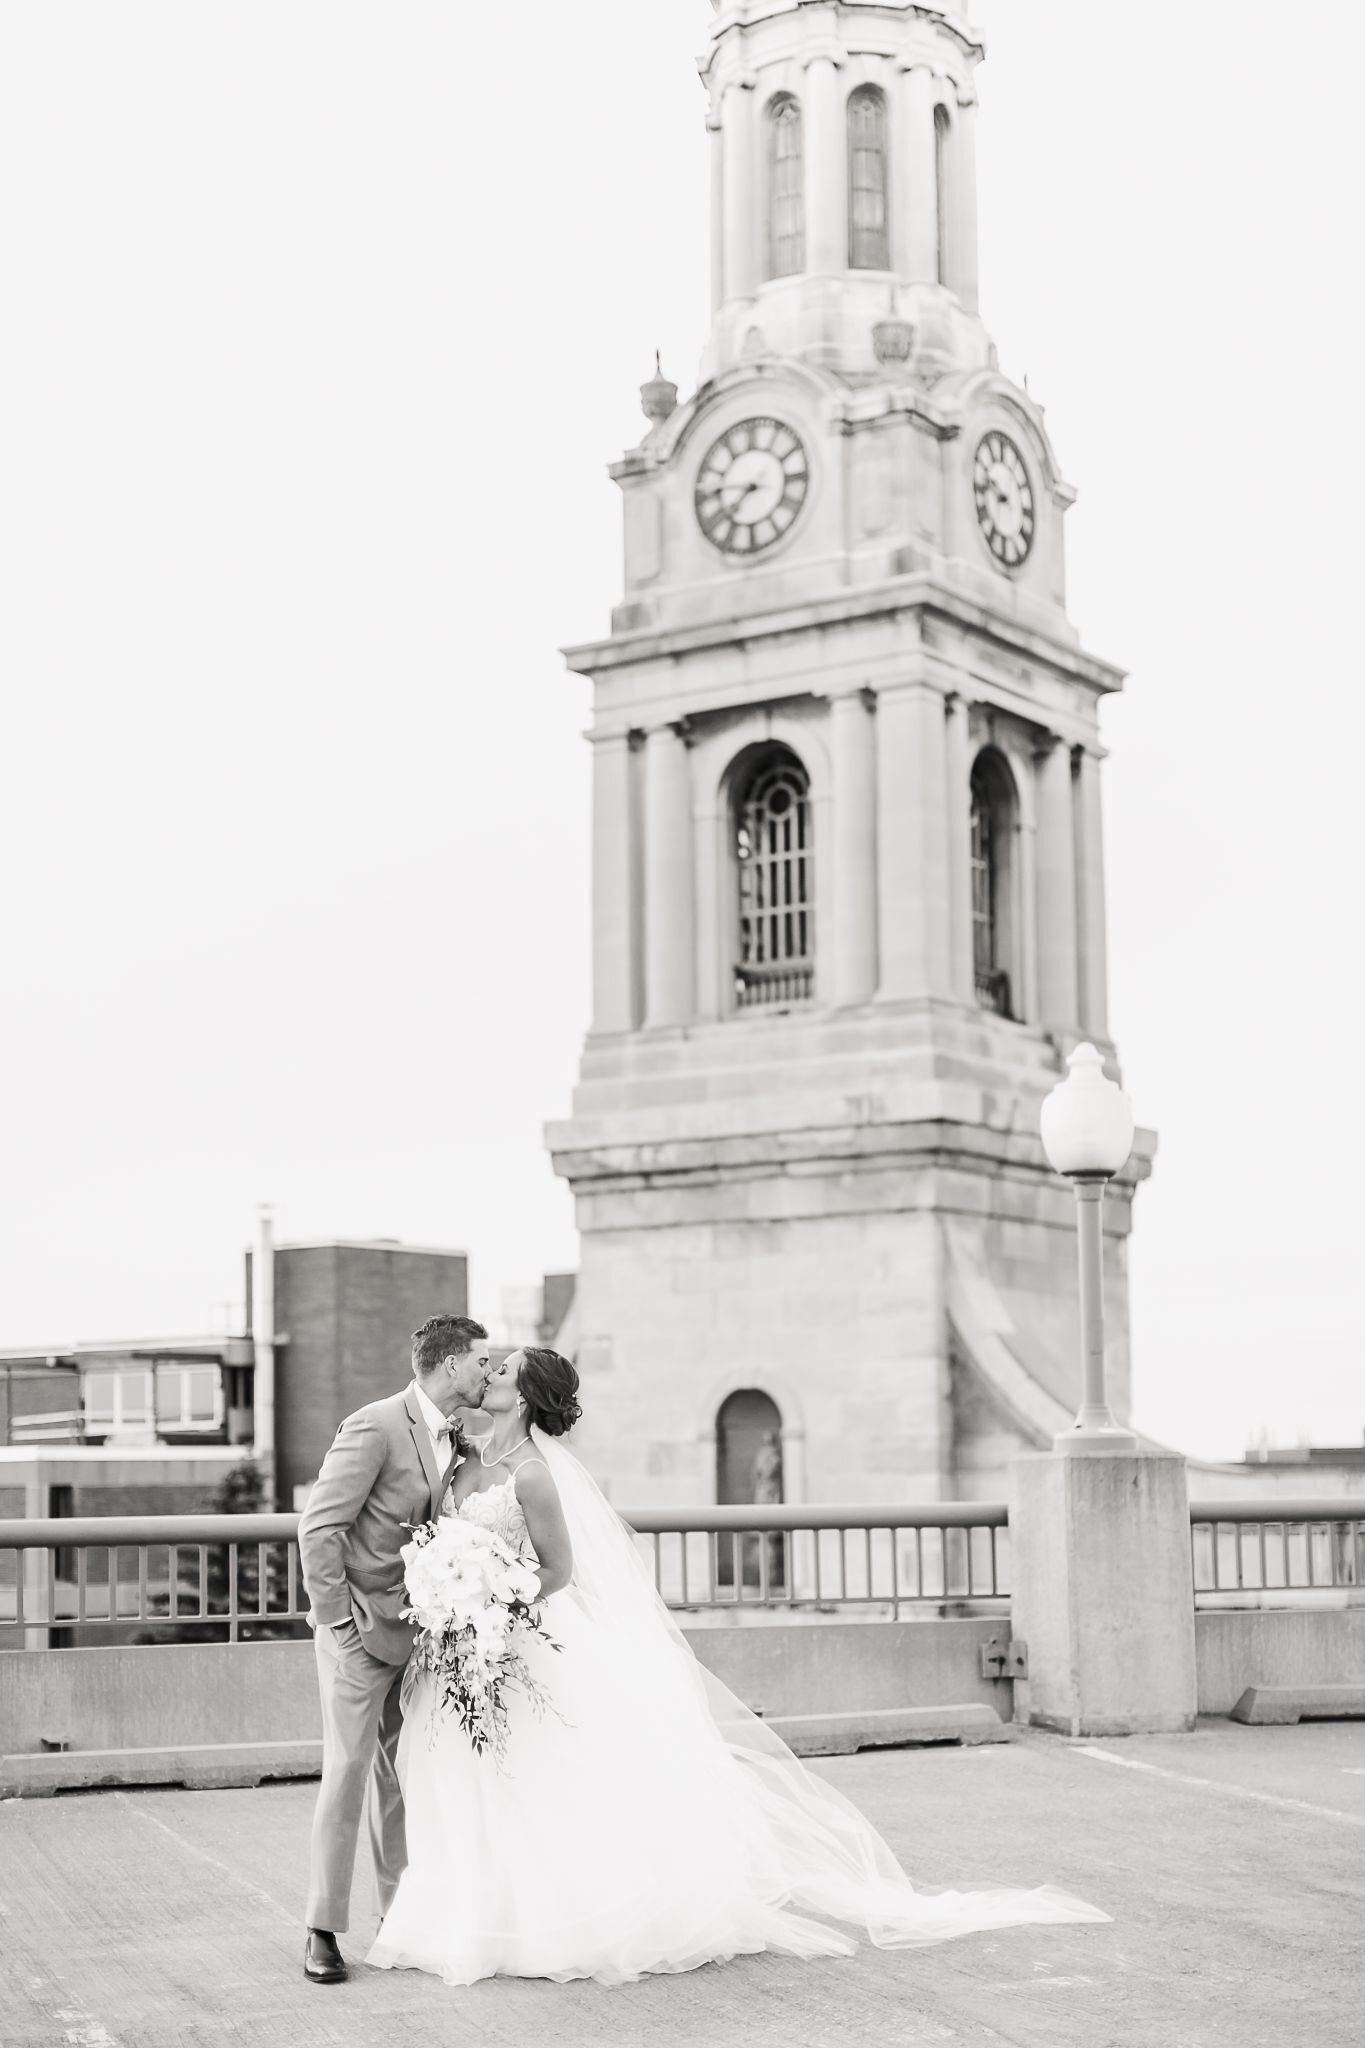 Black and white wedding portrait of a downtown wedding